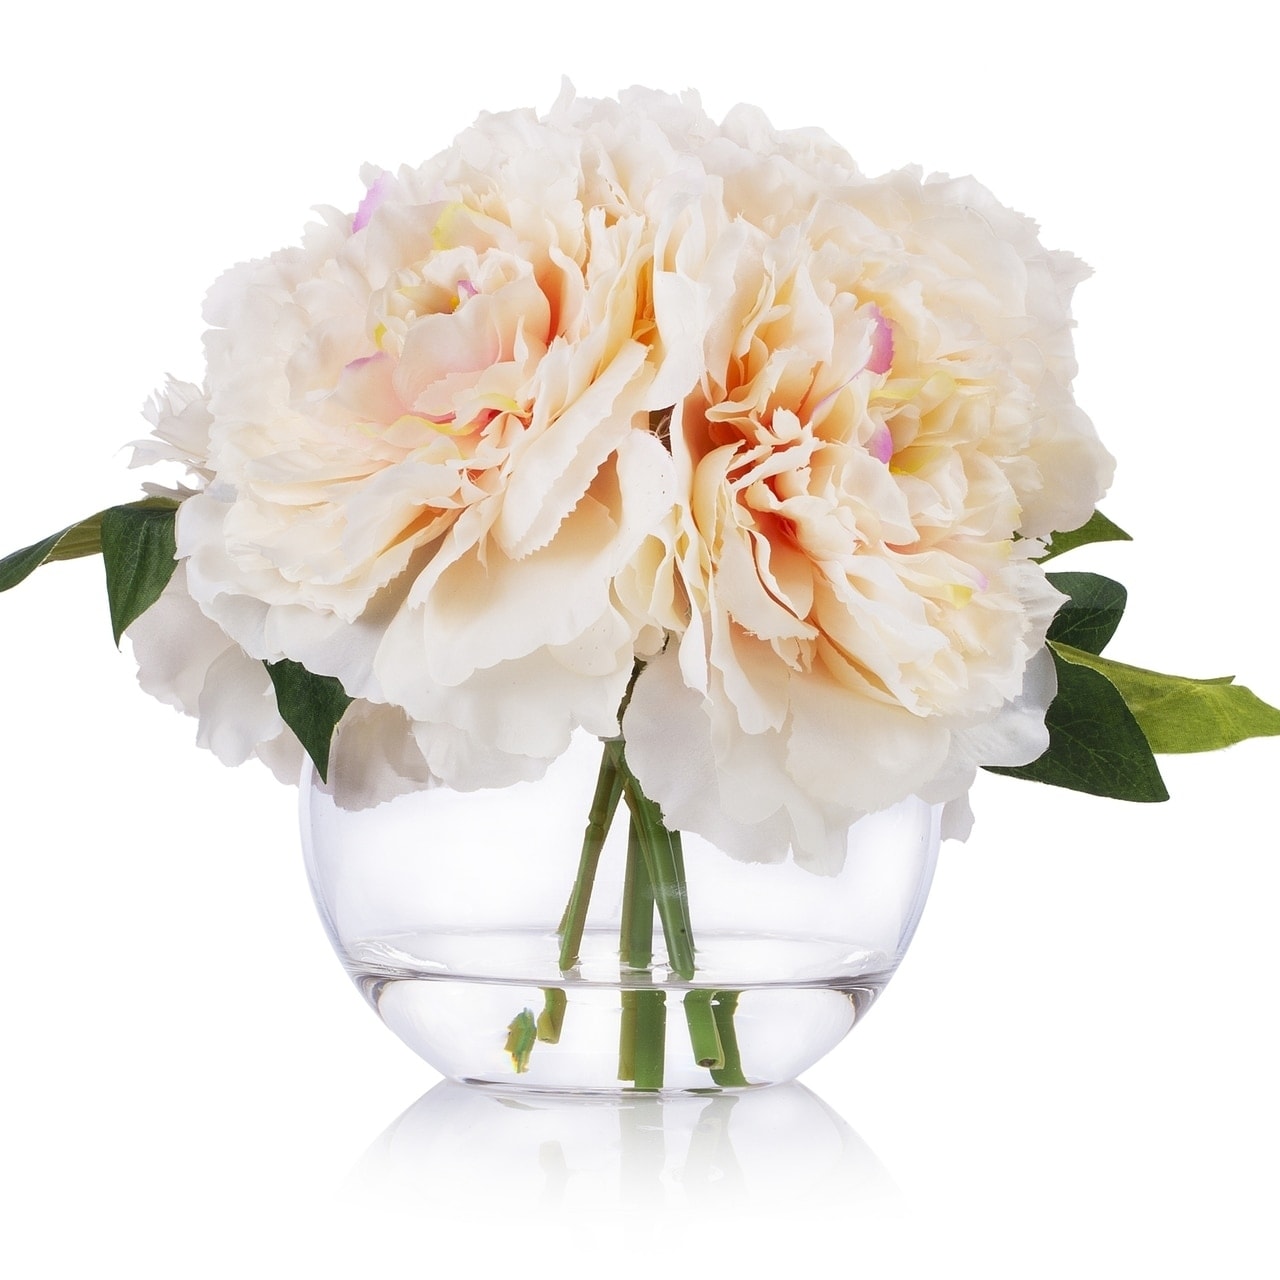 Enova Home 5 Heads Large Peony Flower Arrangement in Glass Vase With Faux Water